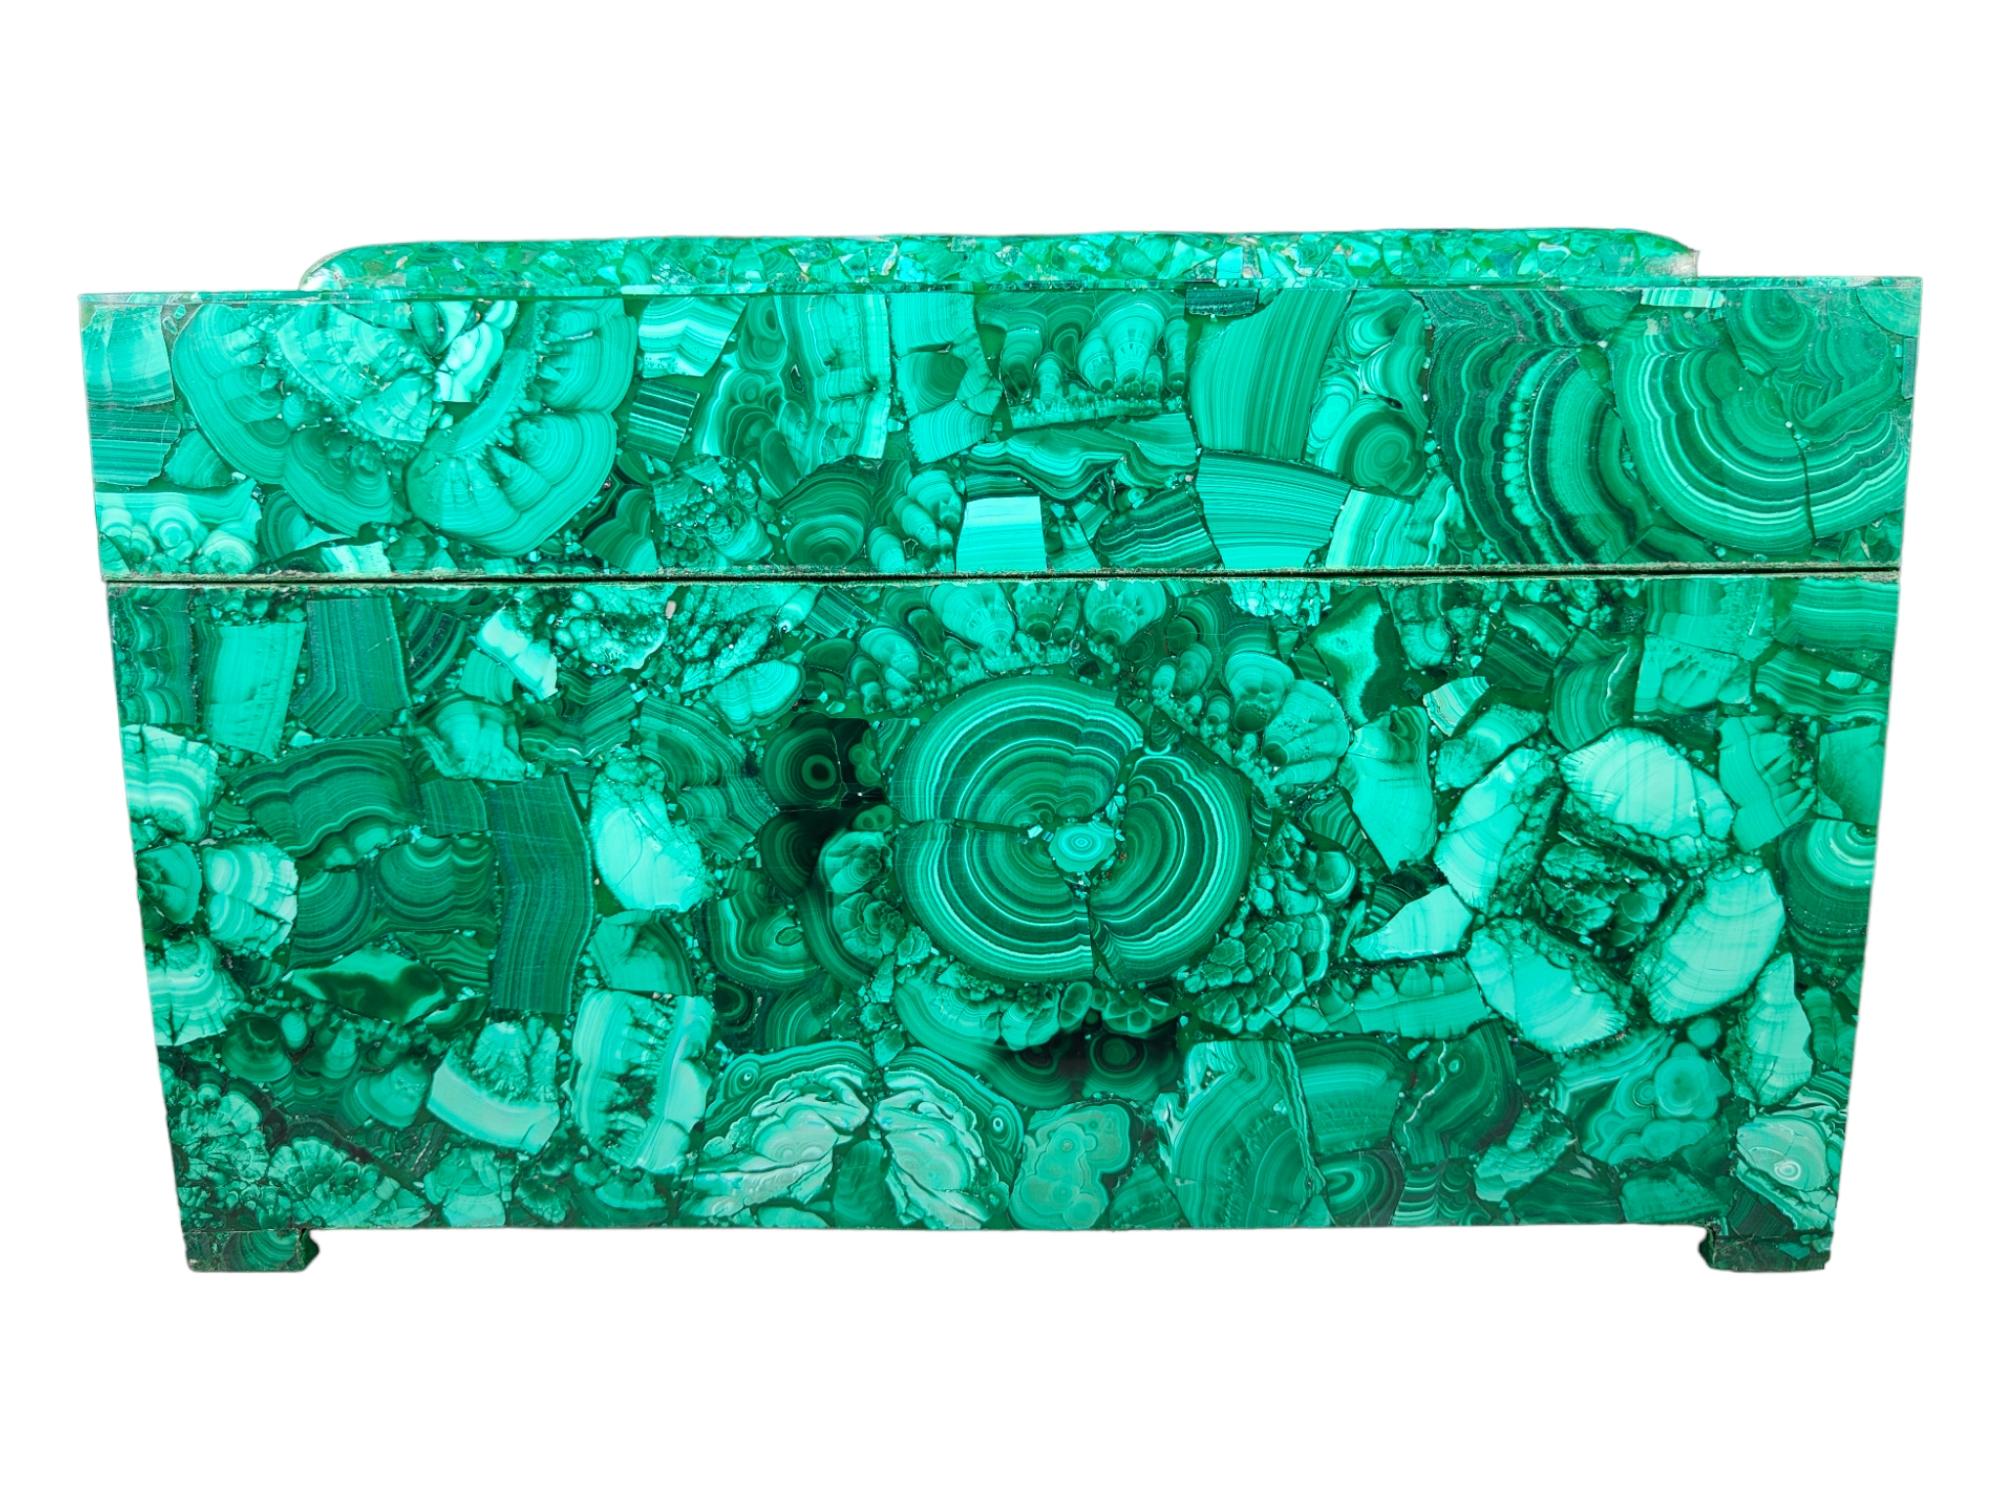 Large Malachite Box From The Mid-20th Century
LARGE MID-XX CENTURY MALACHITE BOX VERY DECORATIVE MID-XX CENTURY MALACHITE BOX LARGE MEASURES: 41X30X26 CM-IN PERFECT STATE OF CONSERVATION MAXIMUM QUALITY OF MALACHITE: AAA